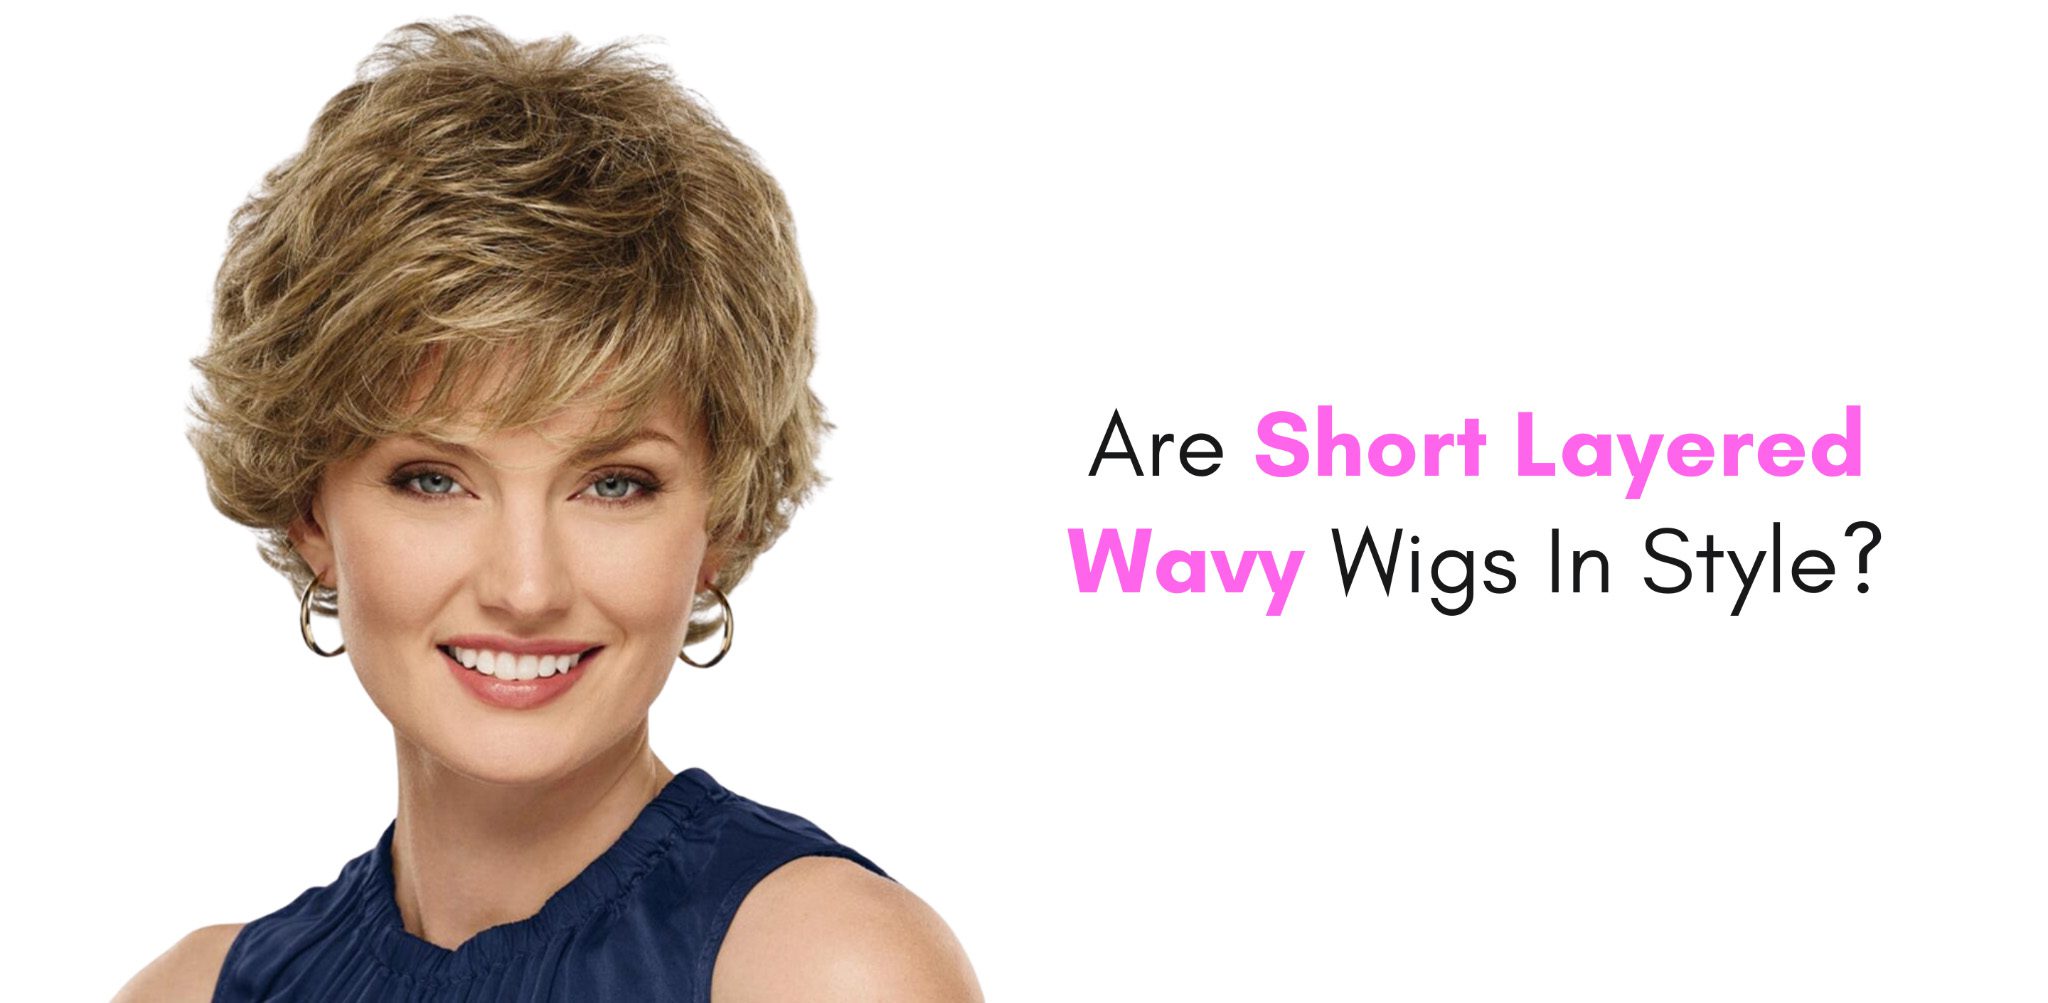 Are Short Layered Wavy Wigs In Style?